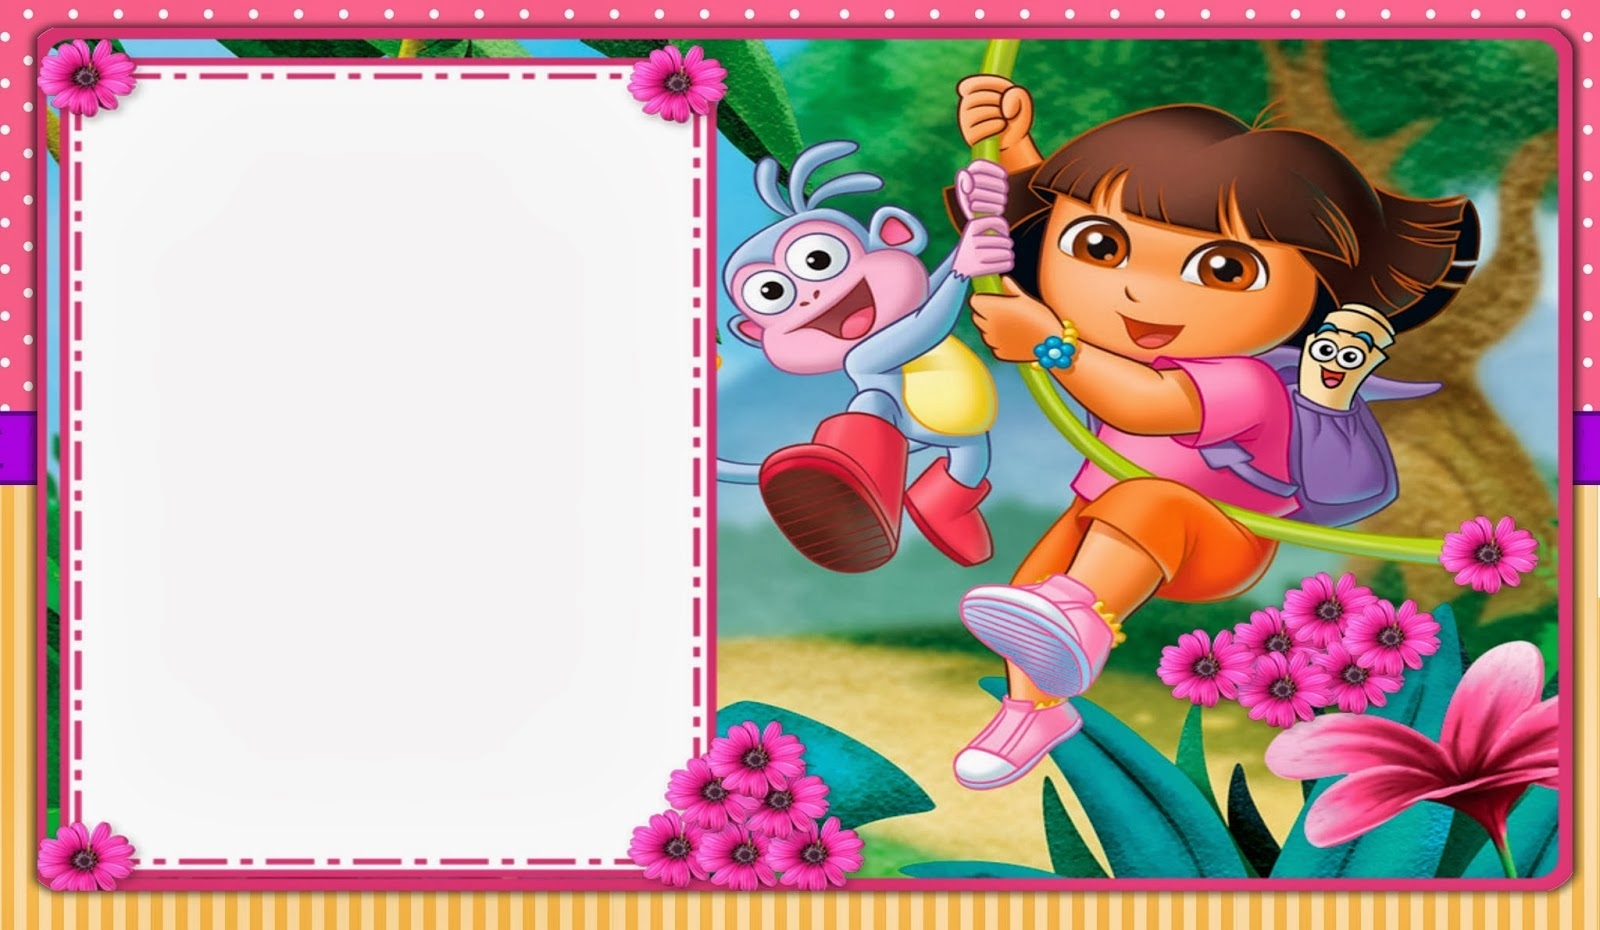 Dora The Explorer Free Printable Invitations Boxes And Party Printables Oh My Fiesta In English - Dora Birthday Cards Free Printable